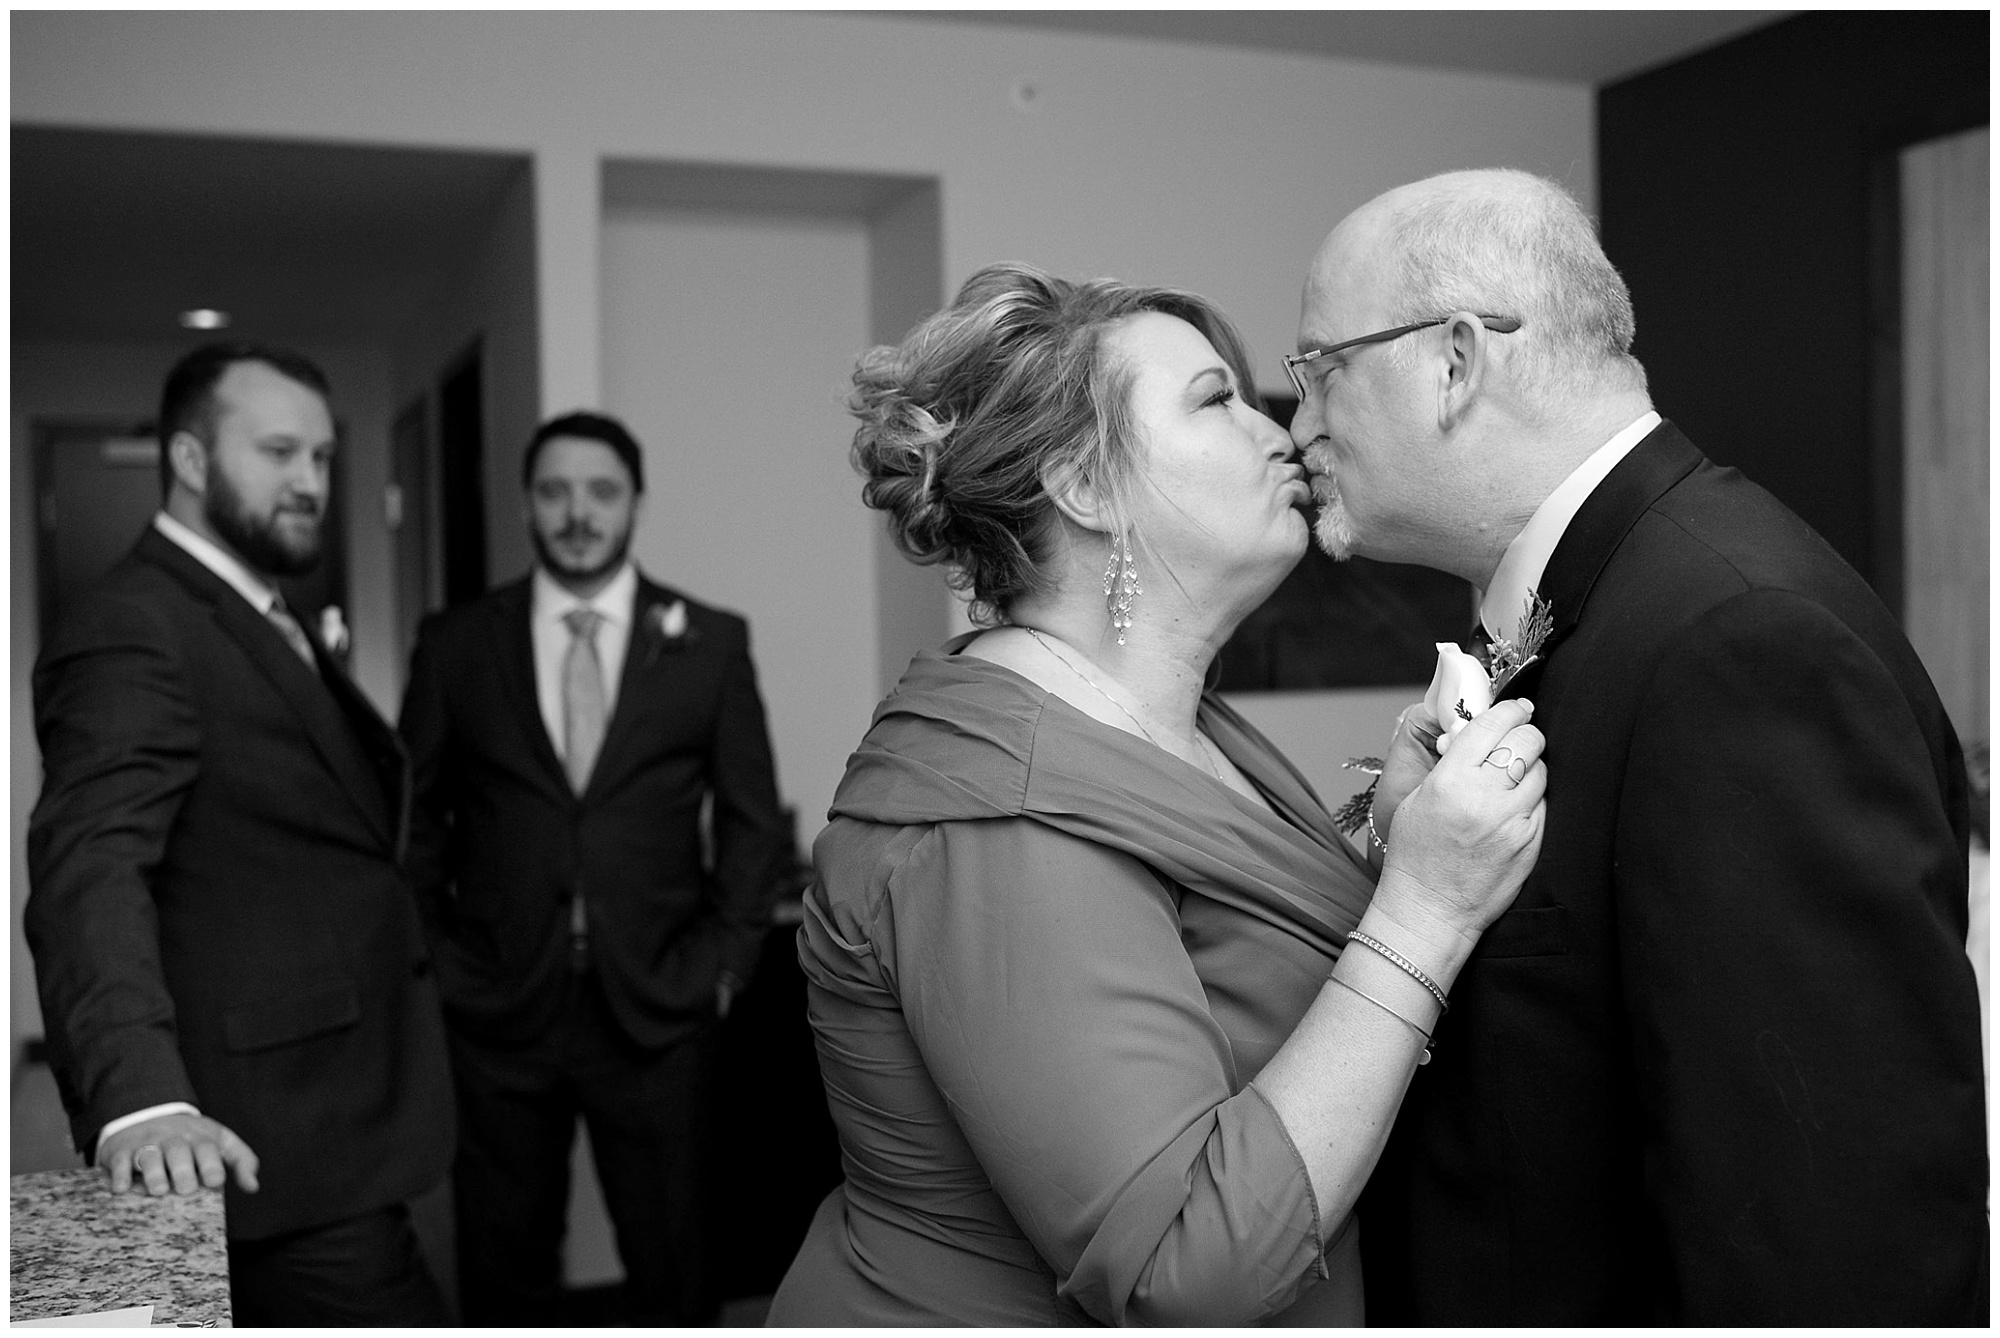 A photo of a groom's parents kissing with he and his best man in the background.